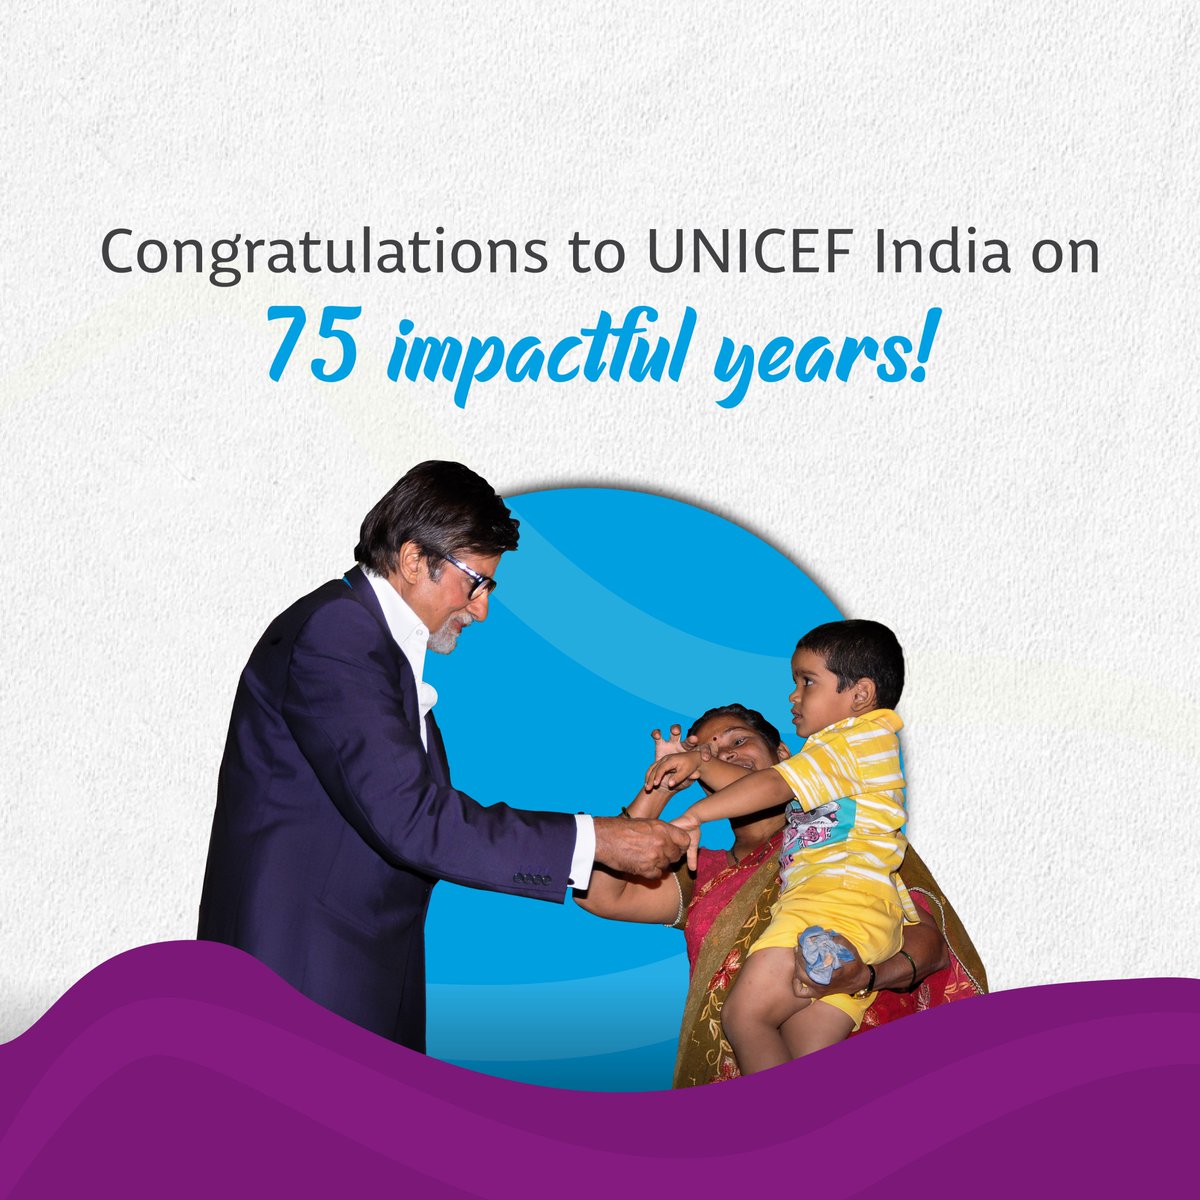 T 5007 - 75 years of #UNICEFwithIndia ! What a significant milestone for an organization that has meant so much to me .. I’m filled with pride knowing the success they have achieved along with the Goverment of India and its partners .. Together, we can and will achieve so much…